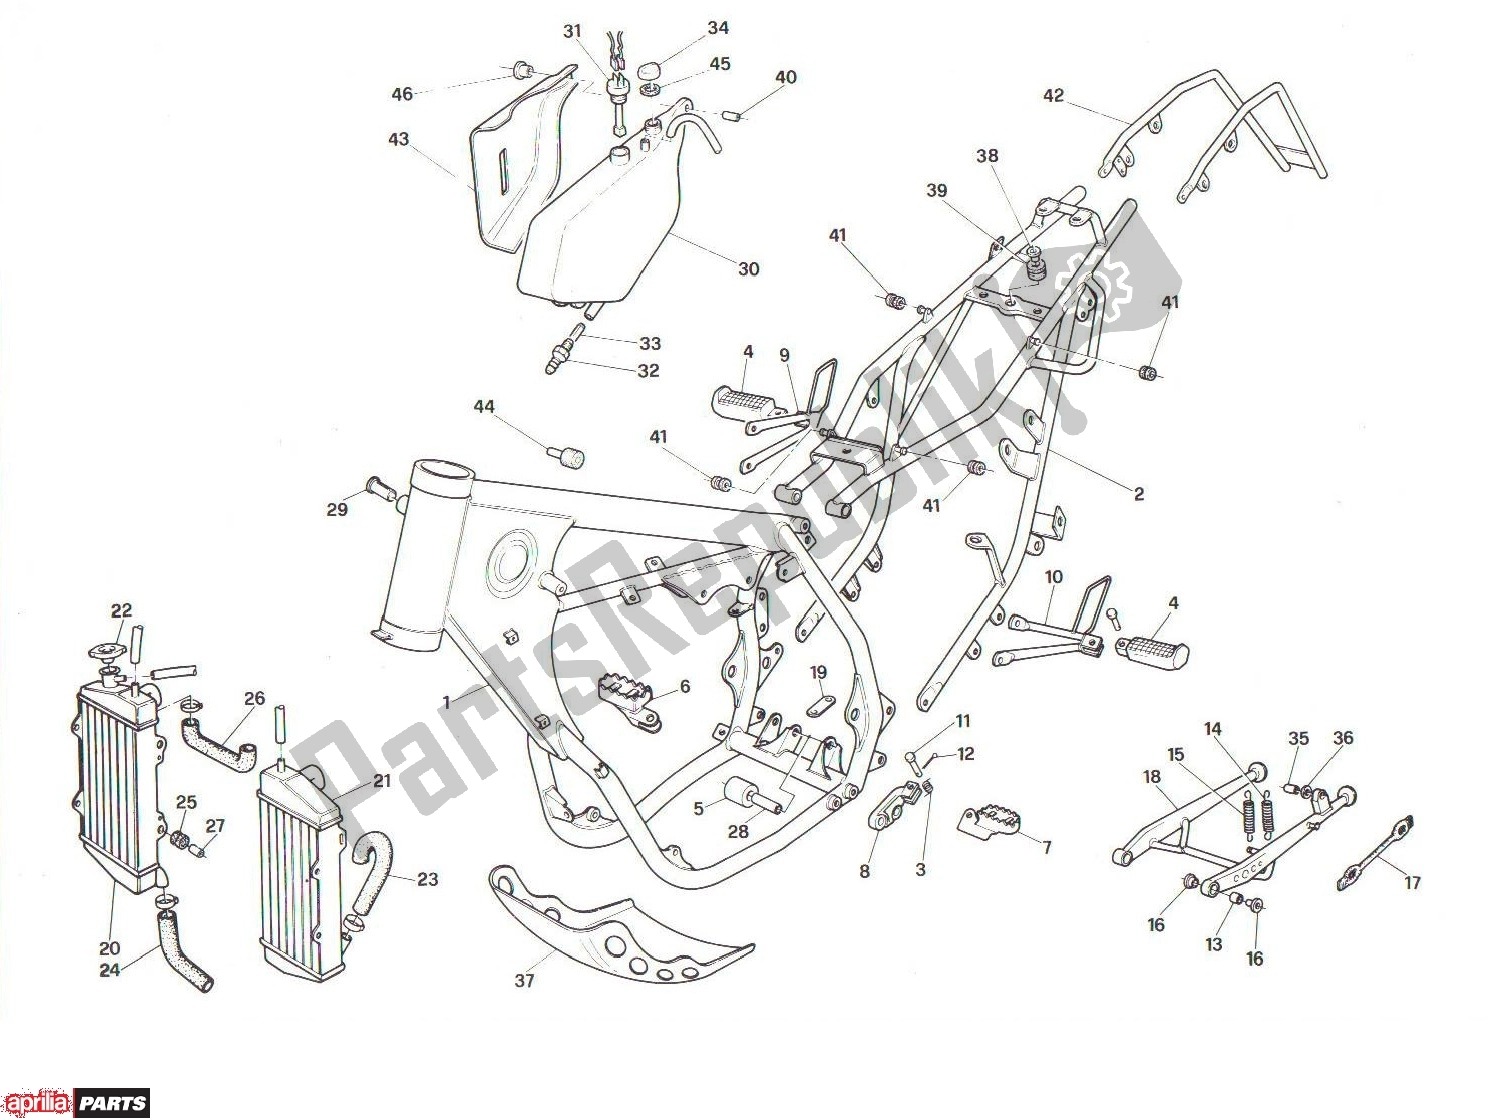 All parts for the Frame of the Aprilia RX 104 125 1991